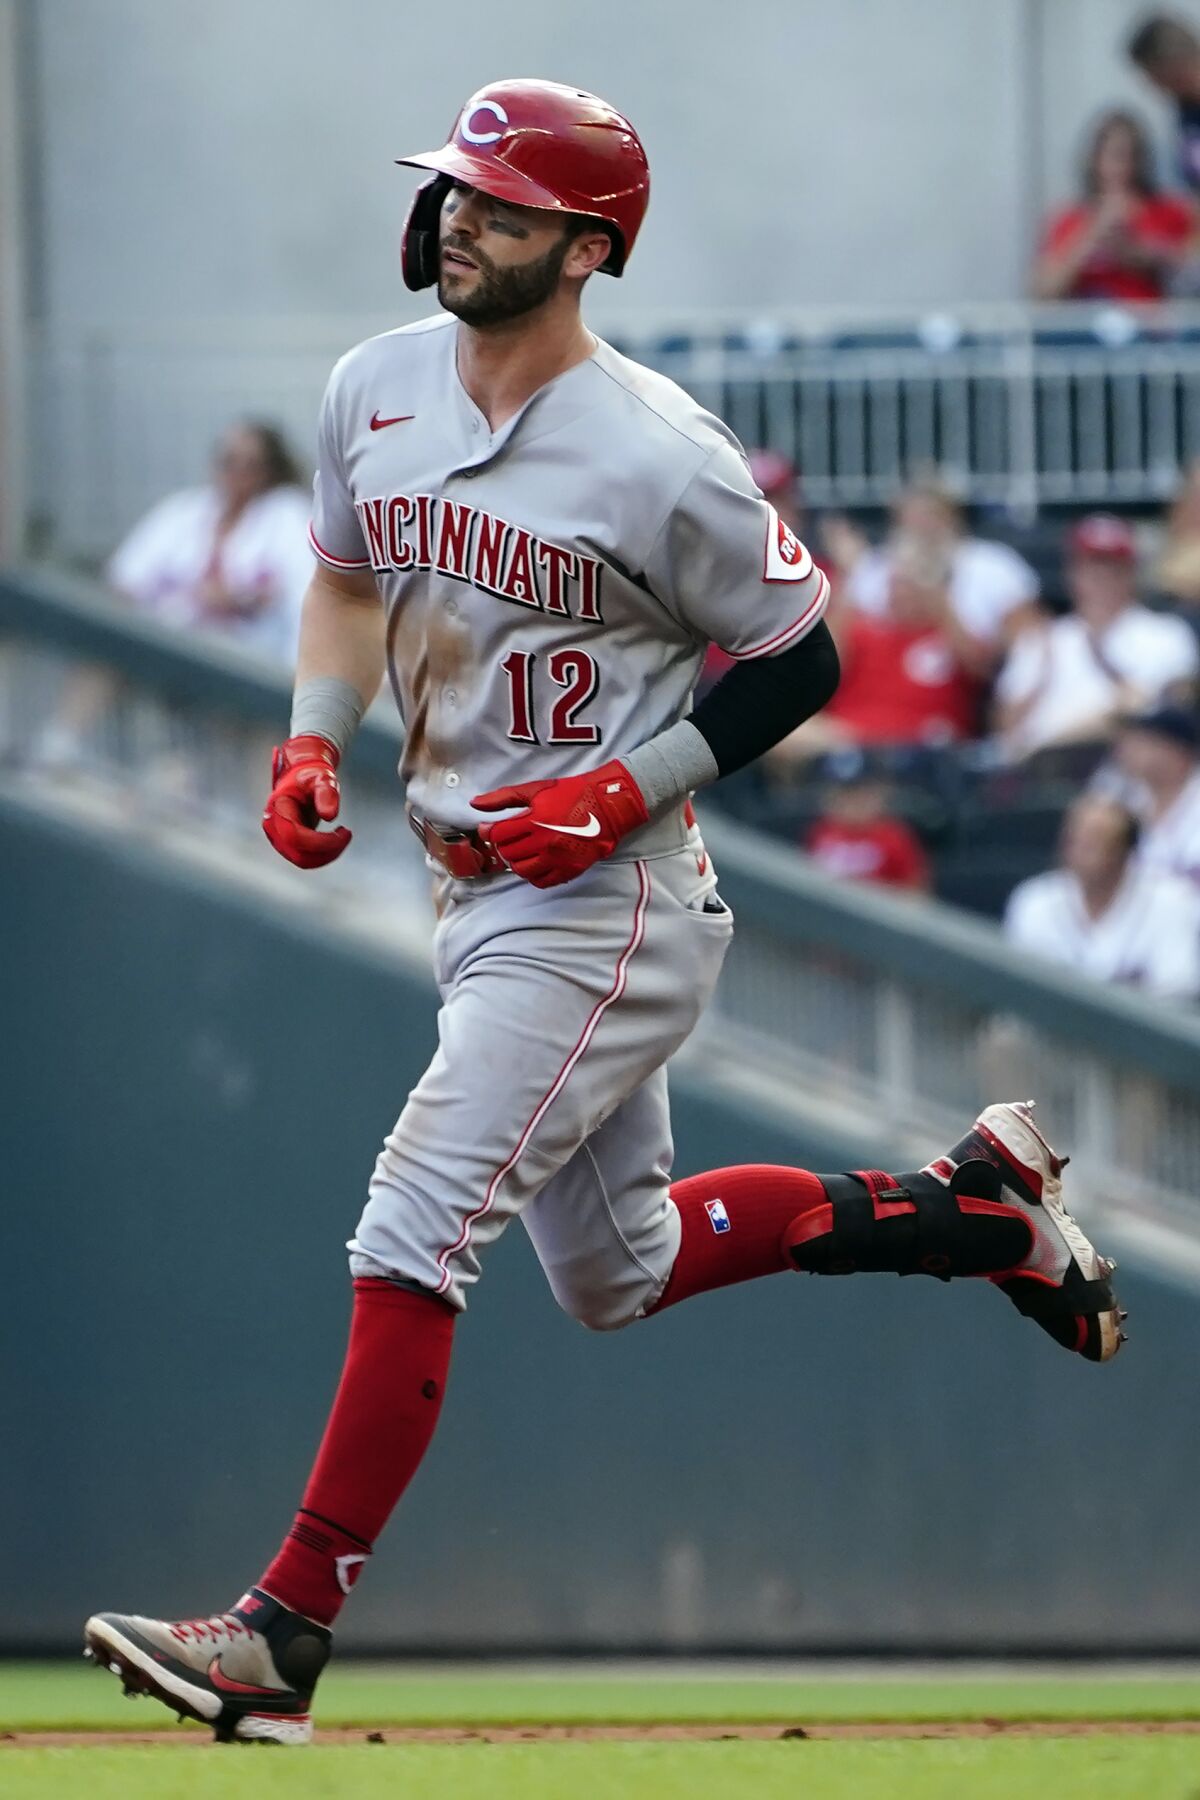 Cincinnati Reds' Tyler Naquin runs the bases after hitting a three-run home run during the third inning of the team's baseball game against the Atlanta Braves on Thursday, Aug. 12, 2021, in Atlanta. (AP Photo/John Bazemore)